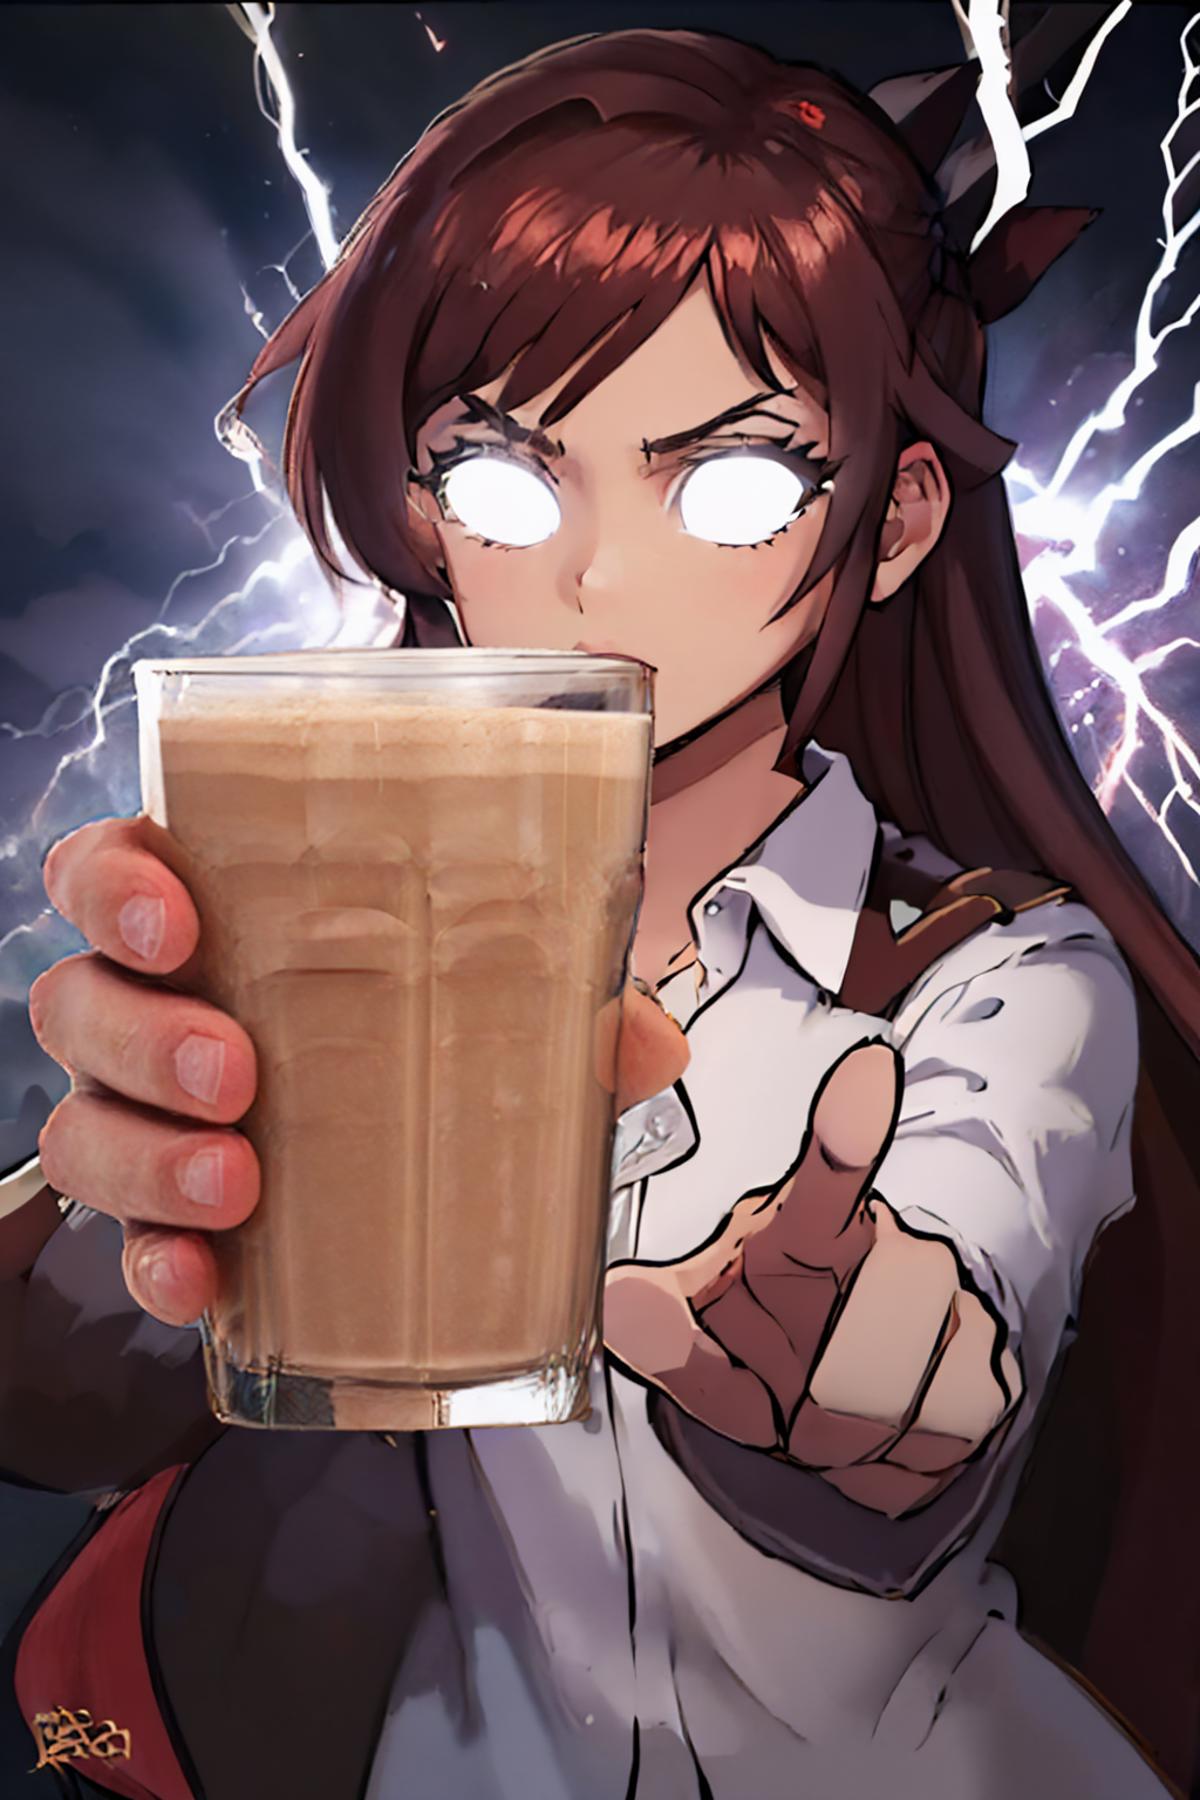 A woman with a cartoonish appearance holds a glass of iced coffee in her hand.